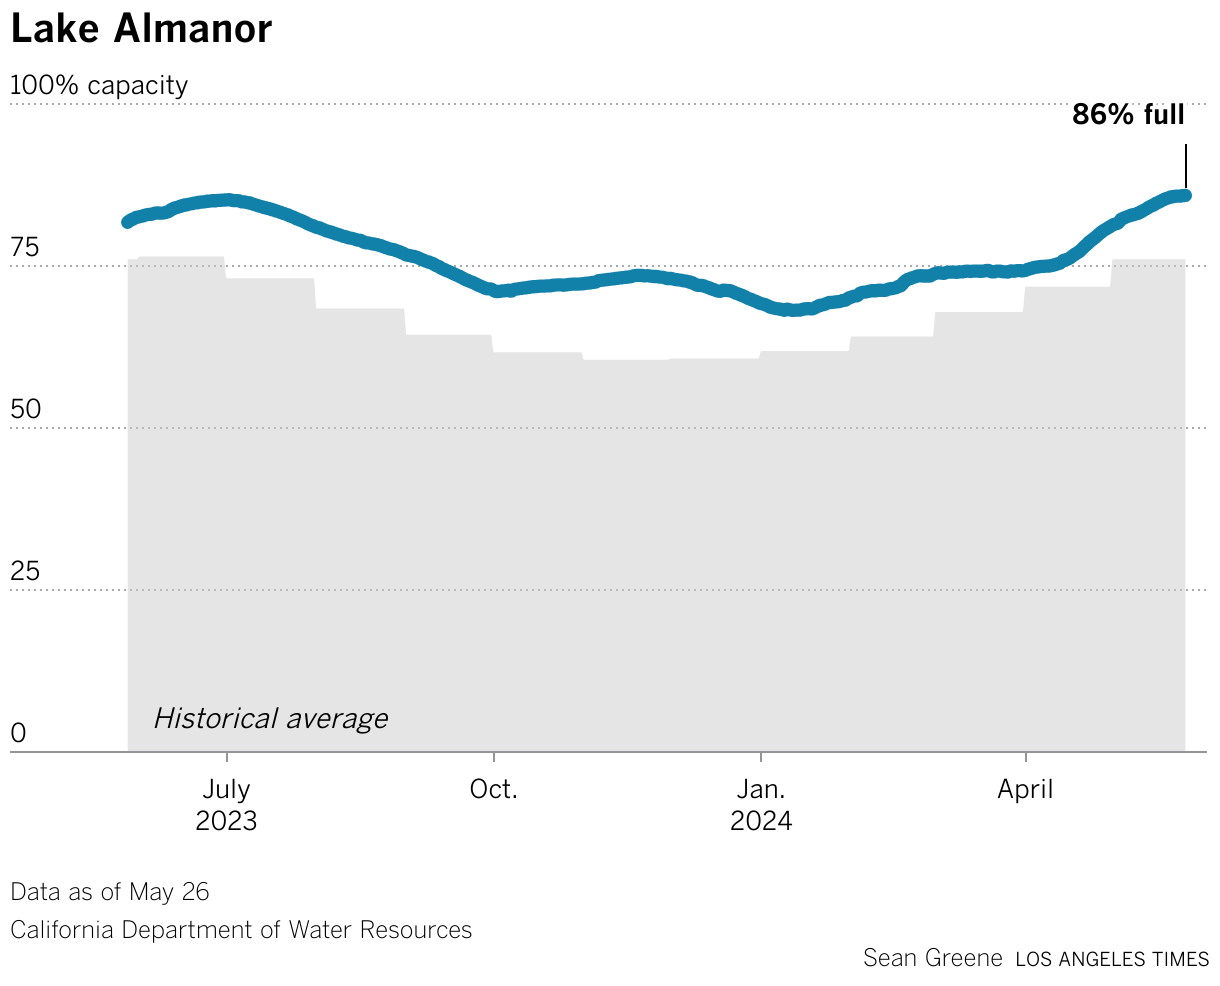 Lake Almanor's storage capacity is 109% of average for this month.